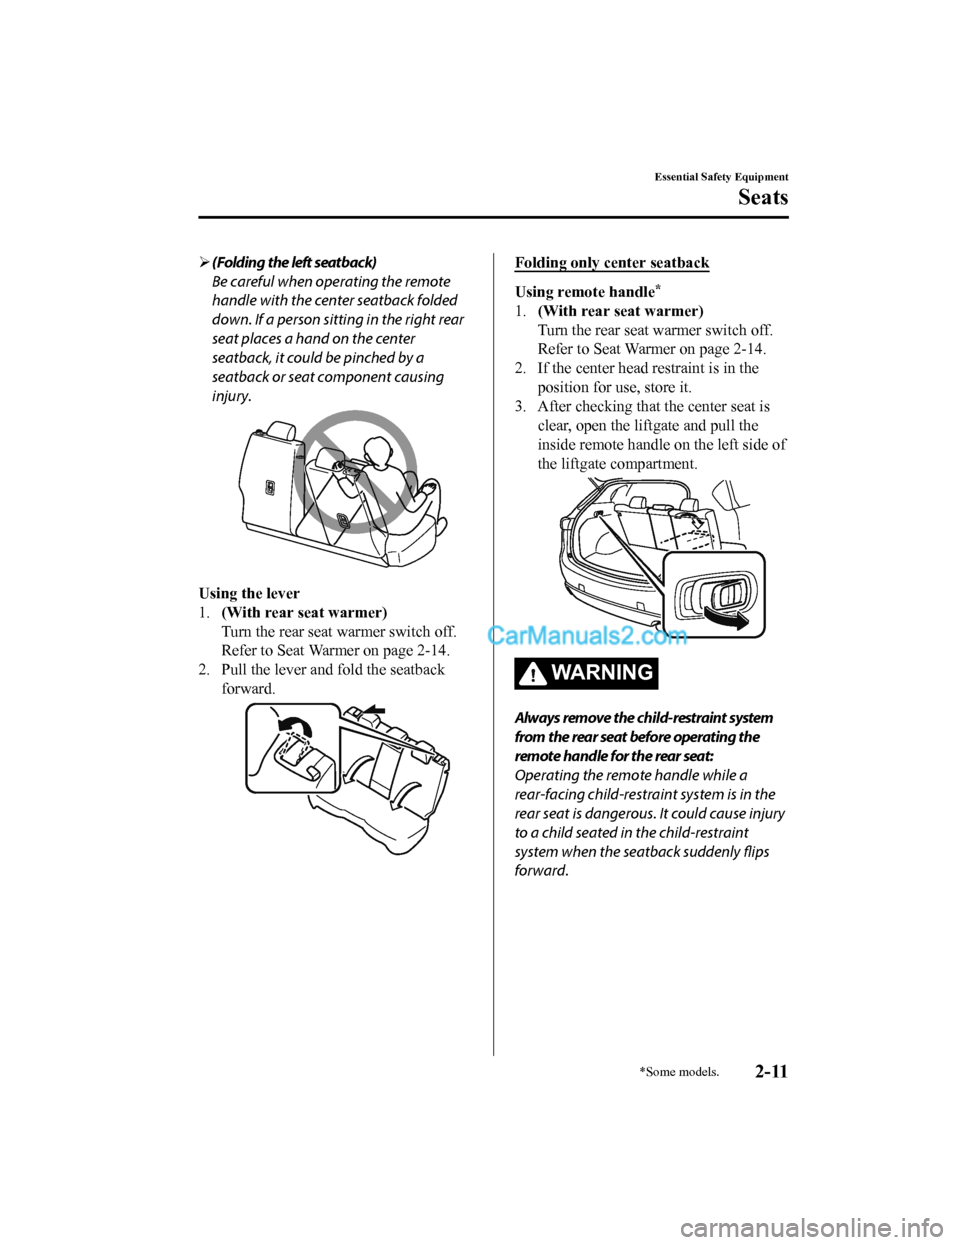 MAZDA MODEL CX-5 2018   (in English) Owners Manual (Folding the left seatback)
Be careful when operating the remote
handle with the center seatback folded
down. If a person sitting in the right rear
seat places a hand on the center
seatback, it cou